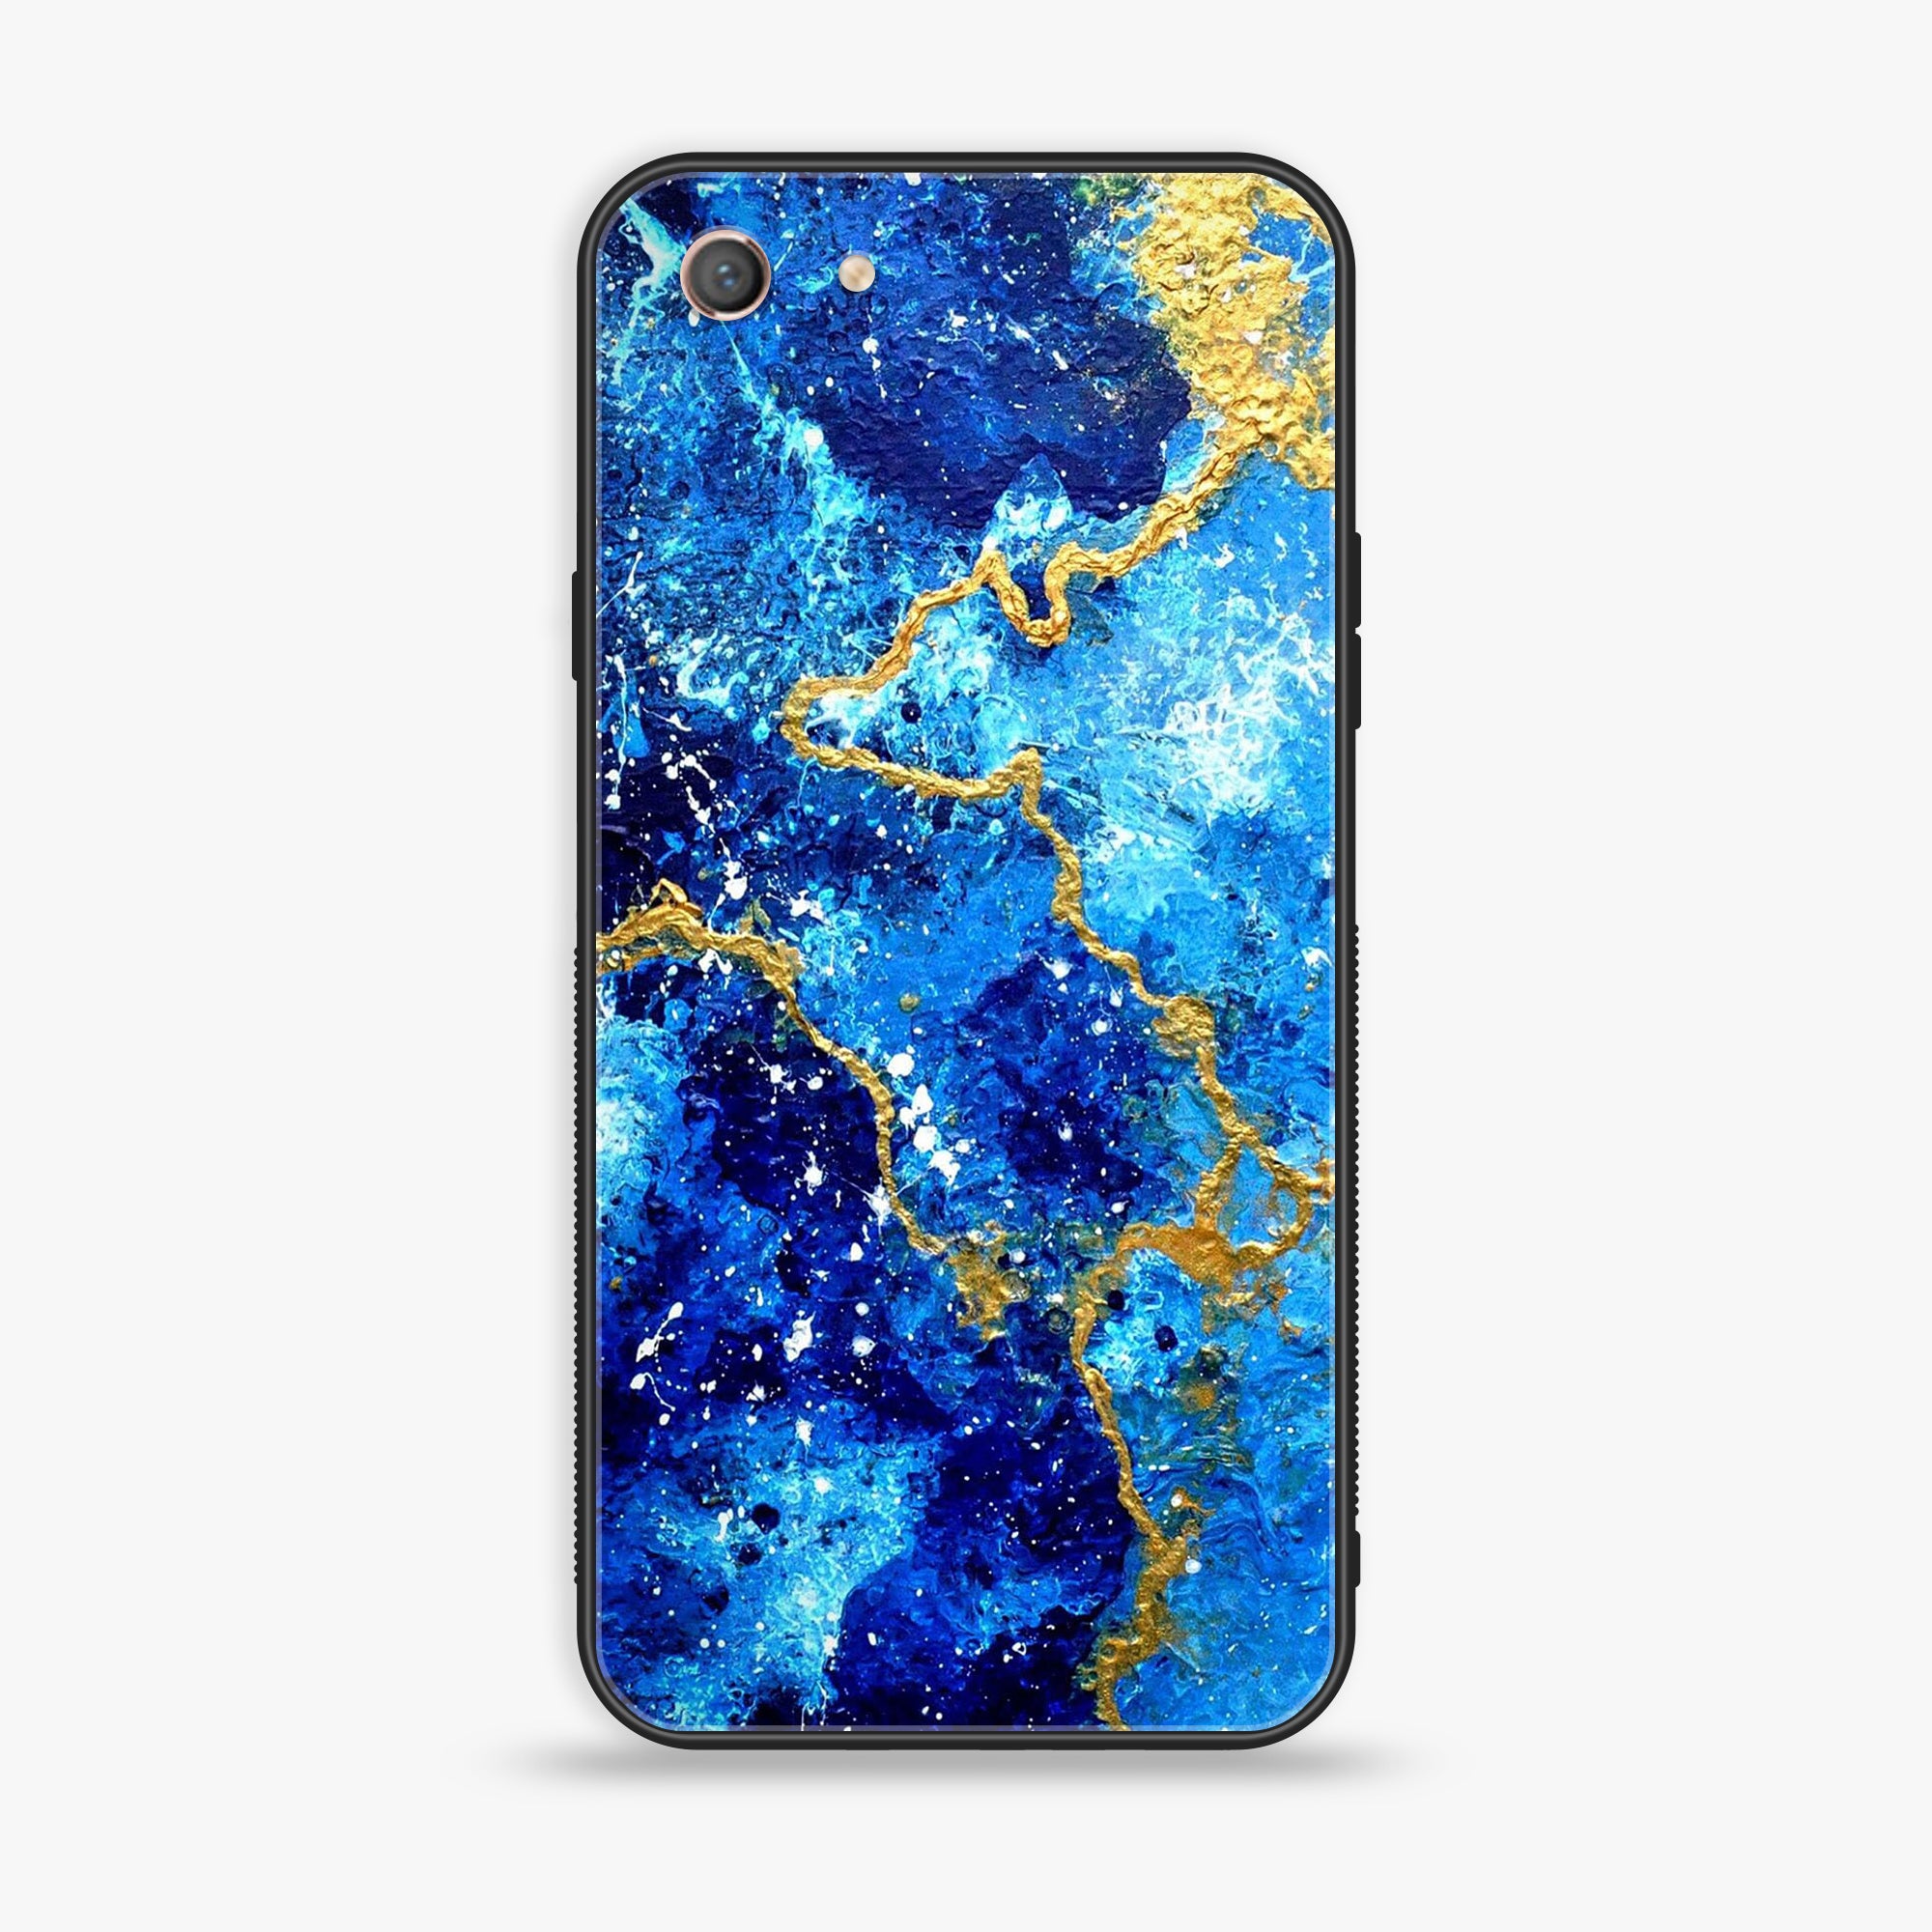 Oppo A71 (2017)  - Blue Marble 2.0 Series - Premium Printed Glass soft Bumper shock Proof Case